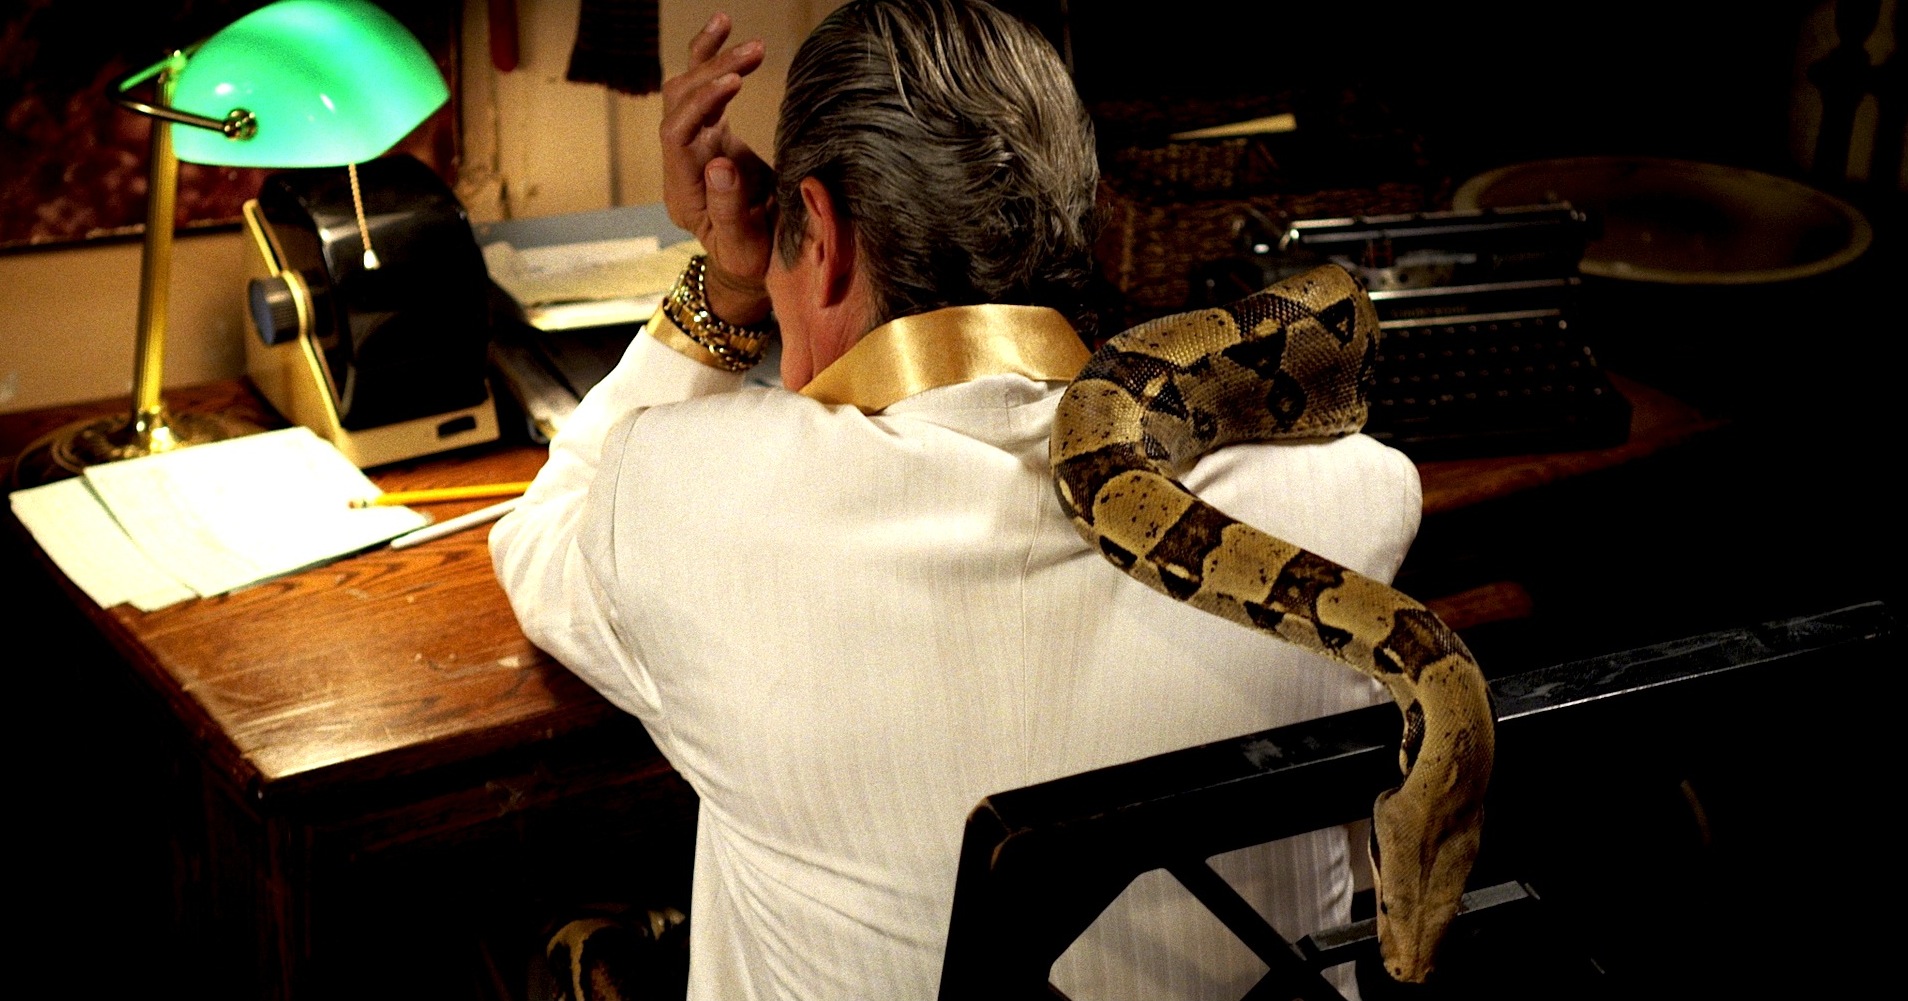 earl-and-his-snake-new-years-eve-in-his-office.jpg